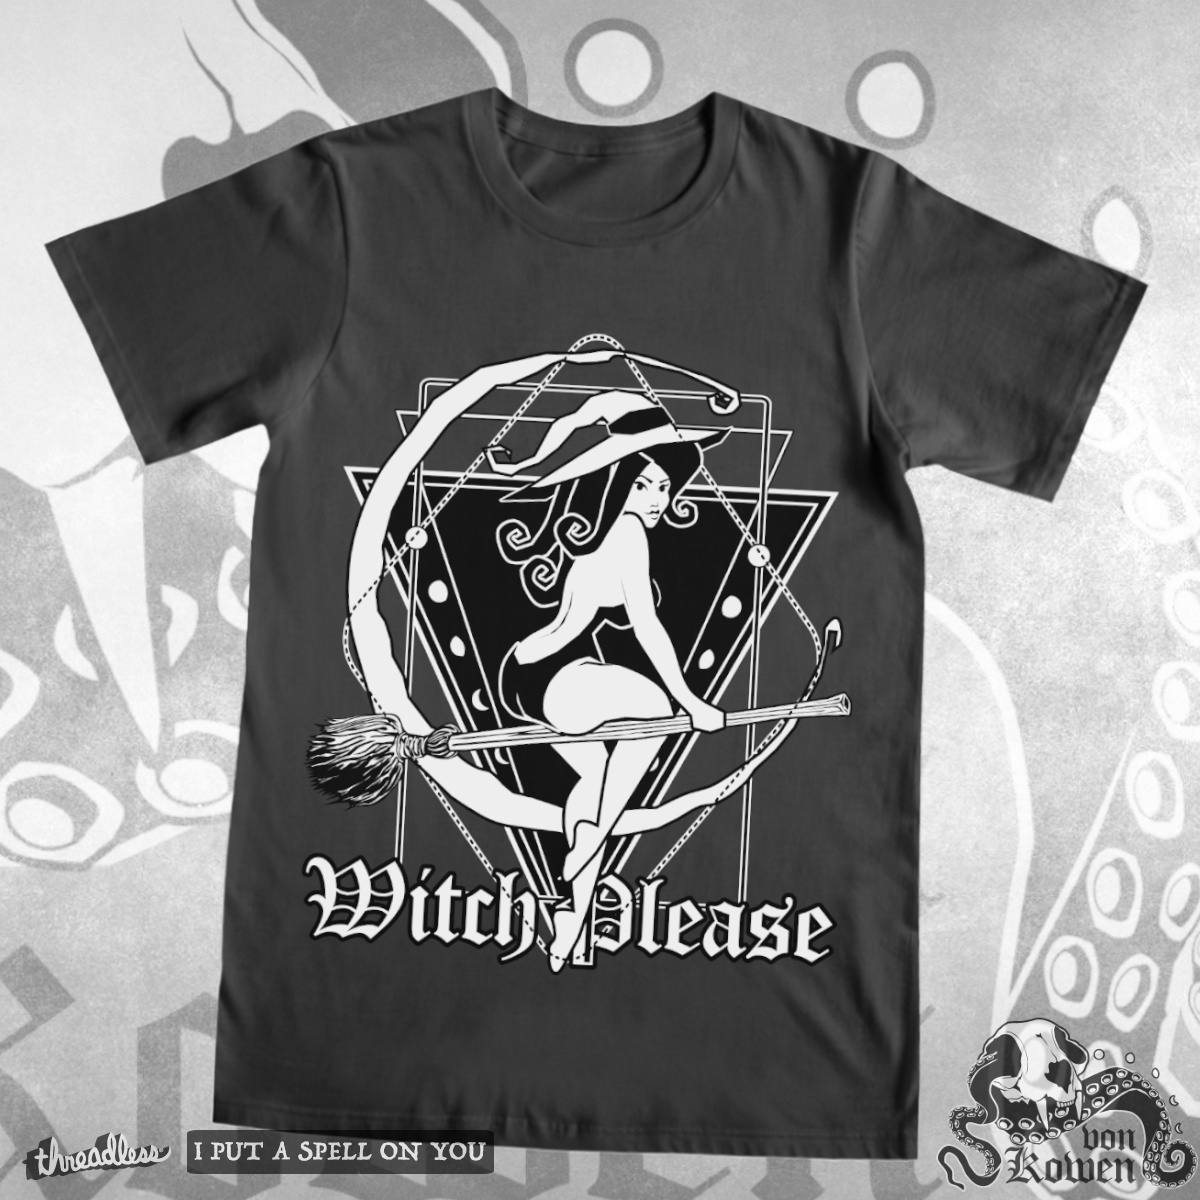 Witch Please, a cool t-shirt design